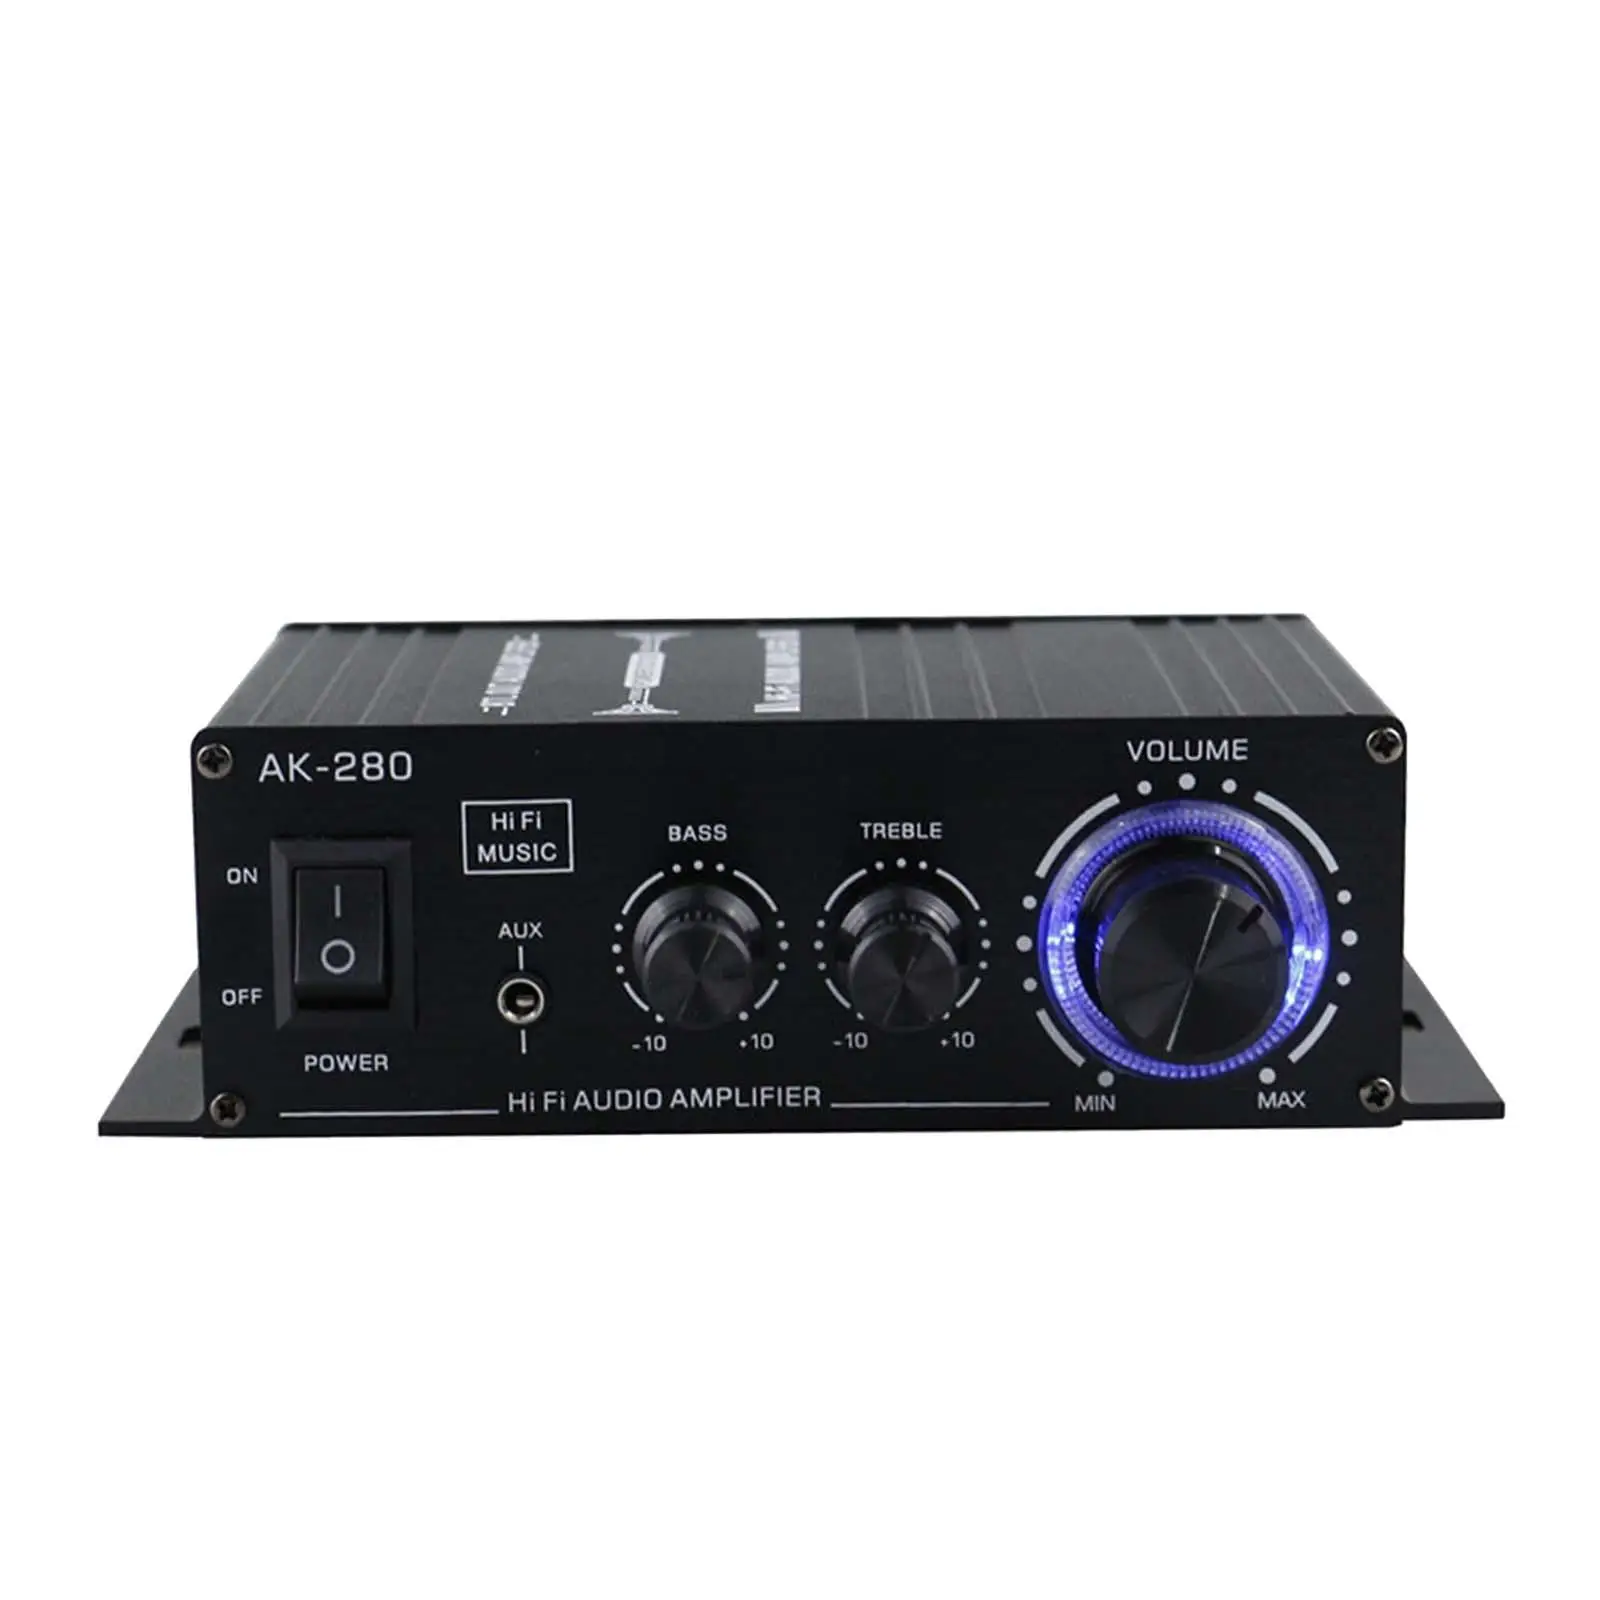 AK-280 Mini Digital Audio Power Amplifier 2 Channel 40wx2 Subwoofer Amplifier 12V Stereo Amplifiers for Home Theater Studio Use